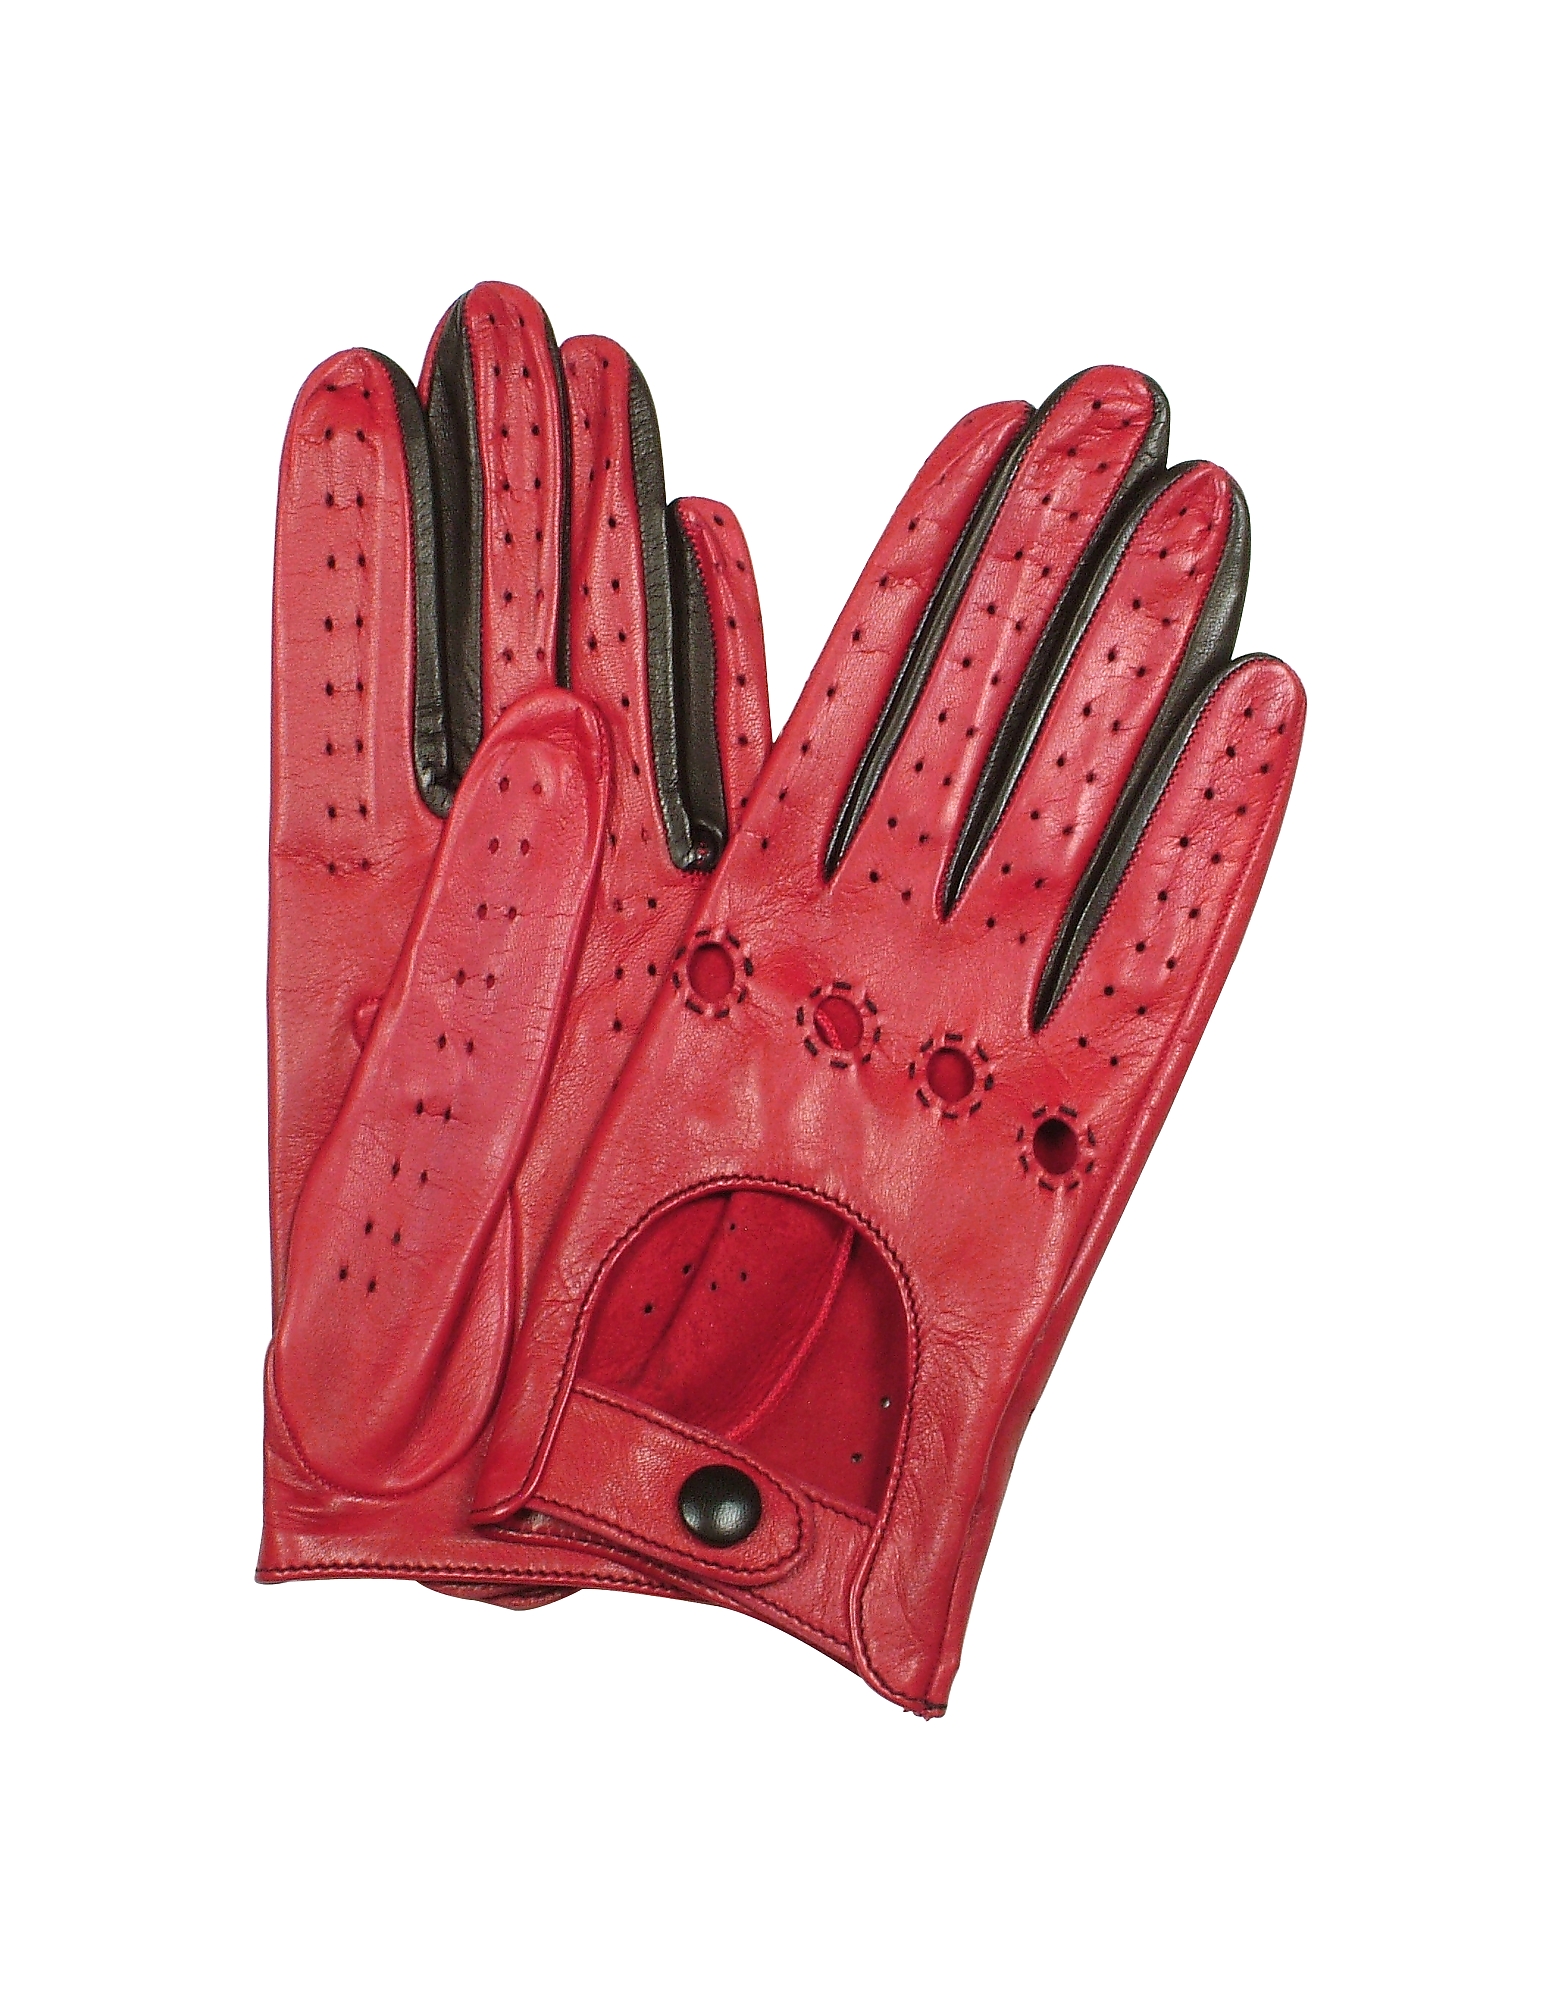 

Women's Red & Black Perforated Italian Leather Driving Gloves